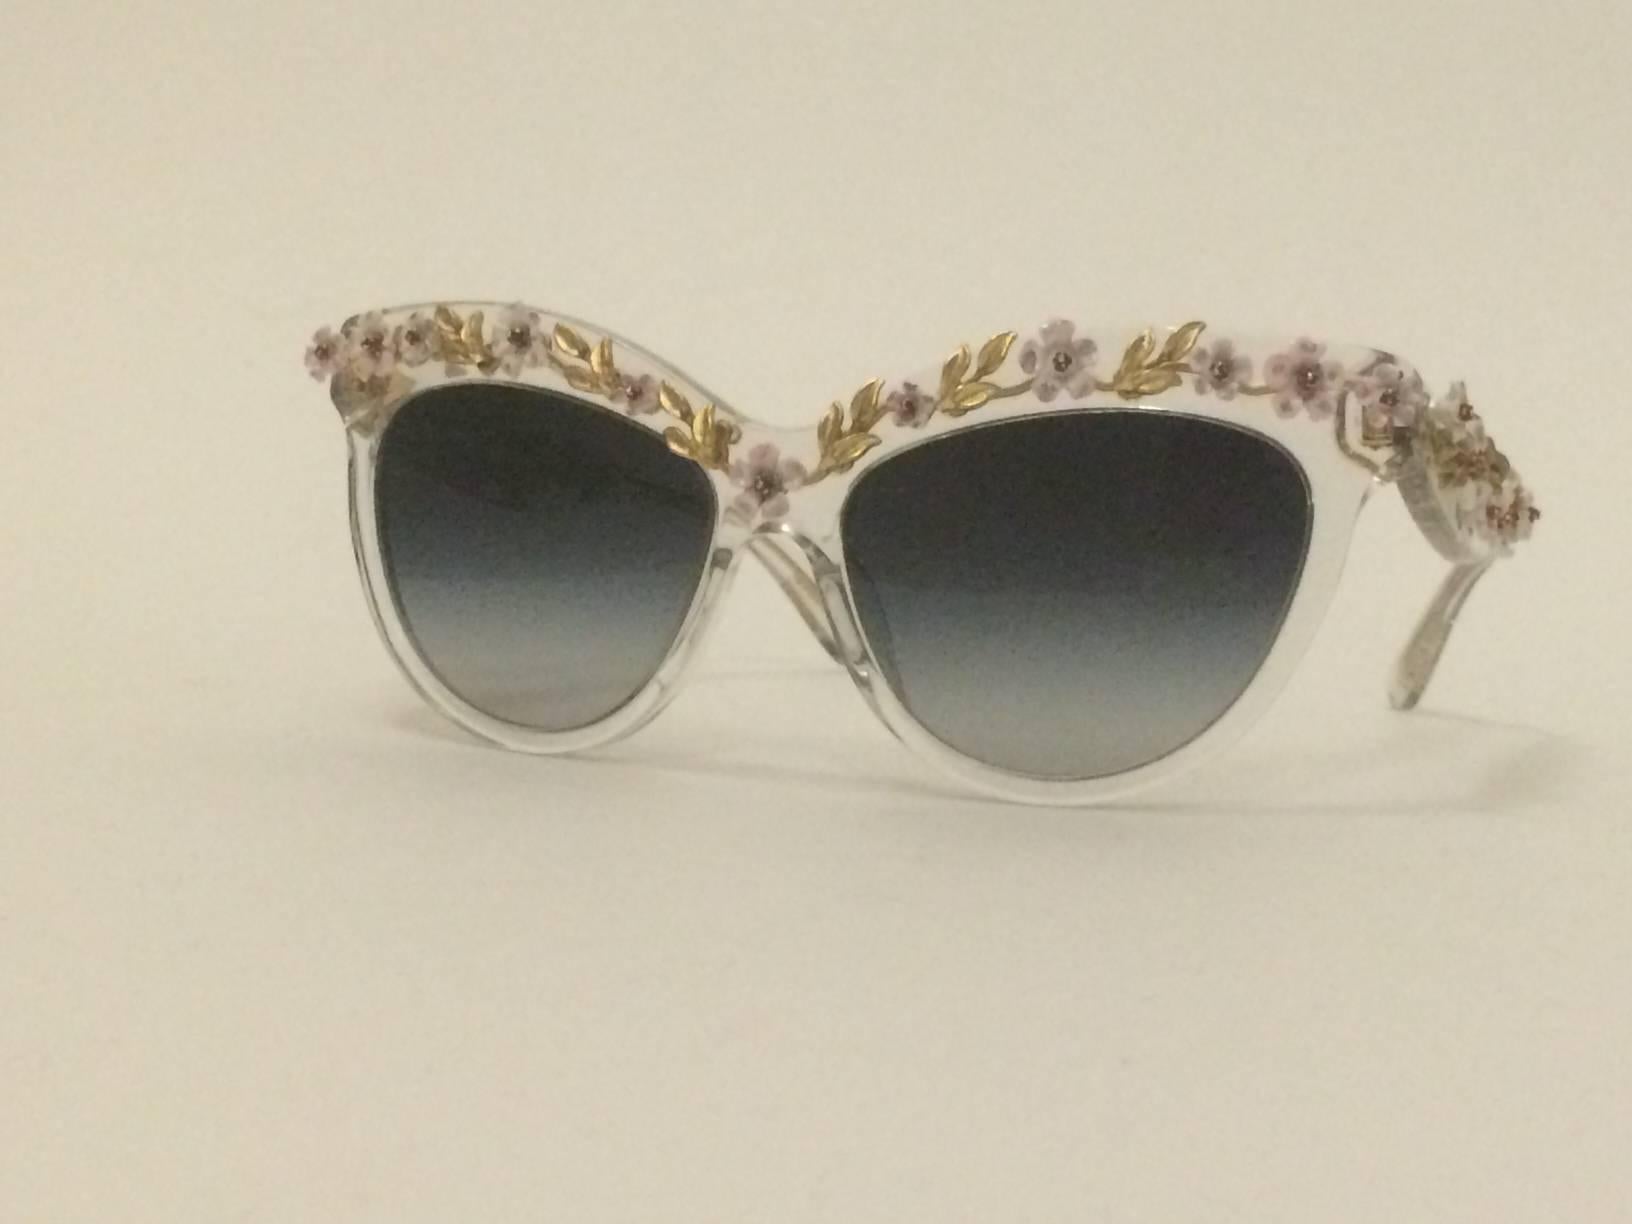 Stunning Dolce & Gabbana cat eye sunglasses adorned with handprinted white, pink and lavender metal flowers. Transparent acetate frames. Grayish taupe gradient lenses. 

Very rare, produced exclusively for Luisa via Roma Boutique. Retailed at